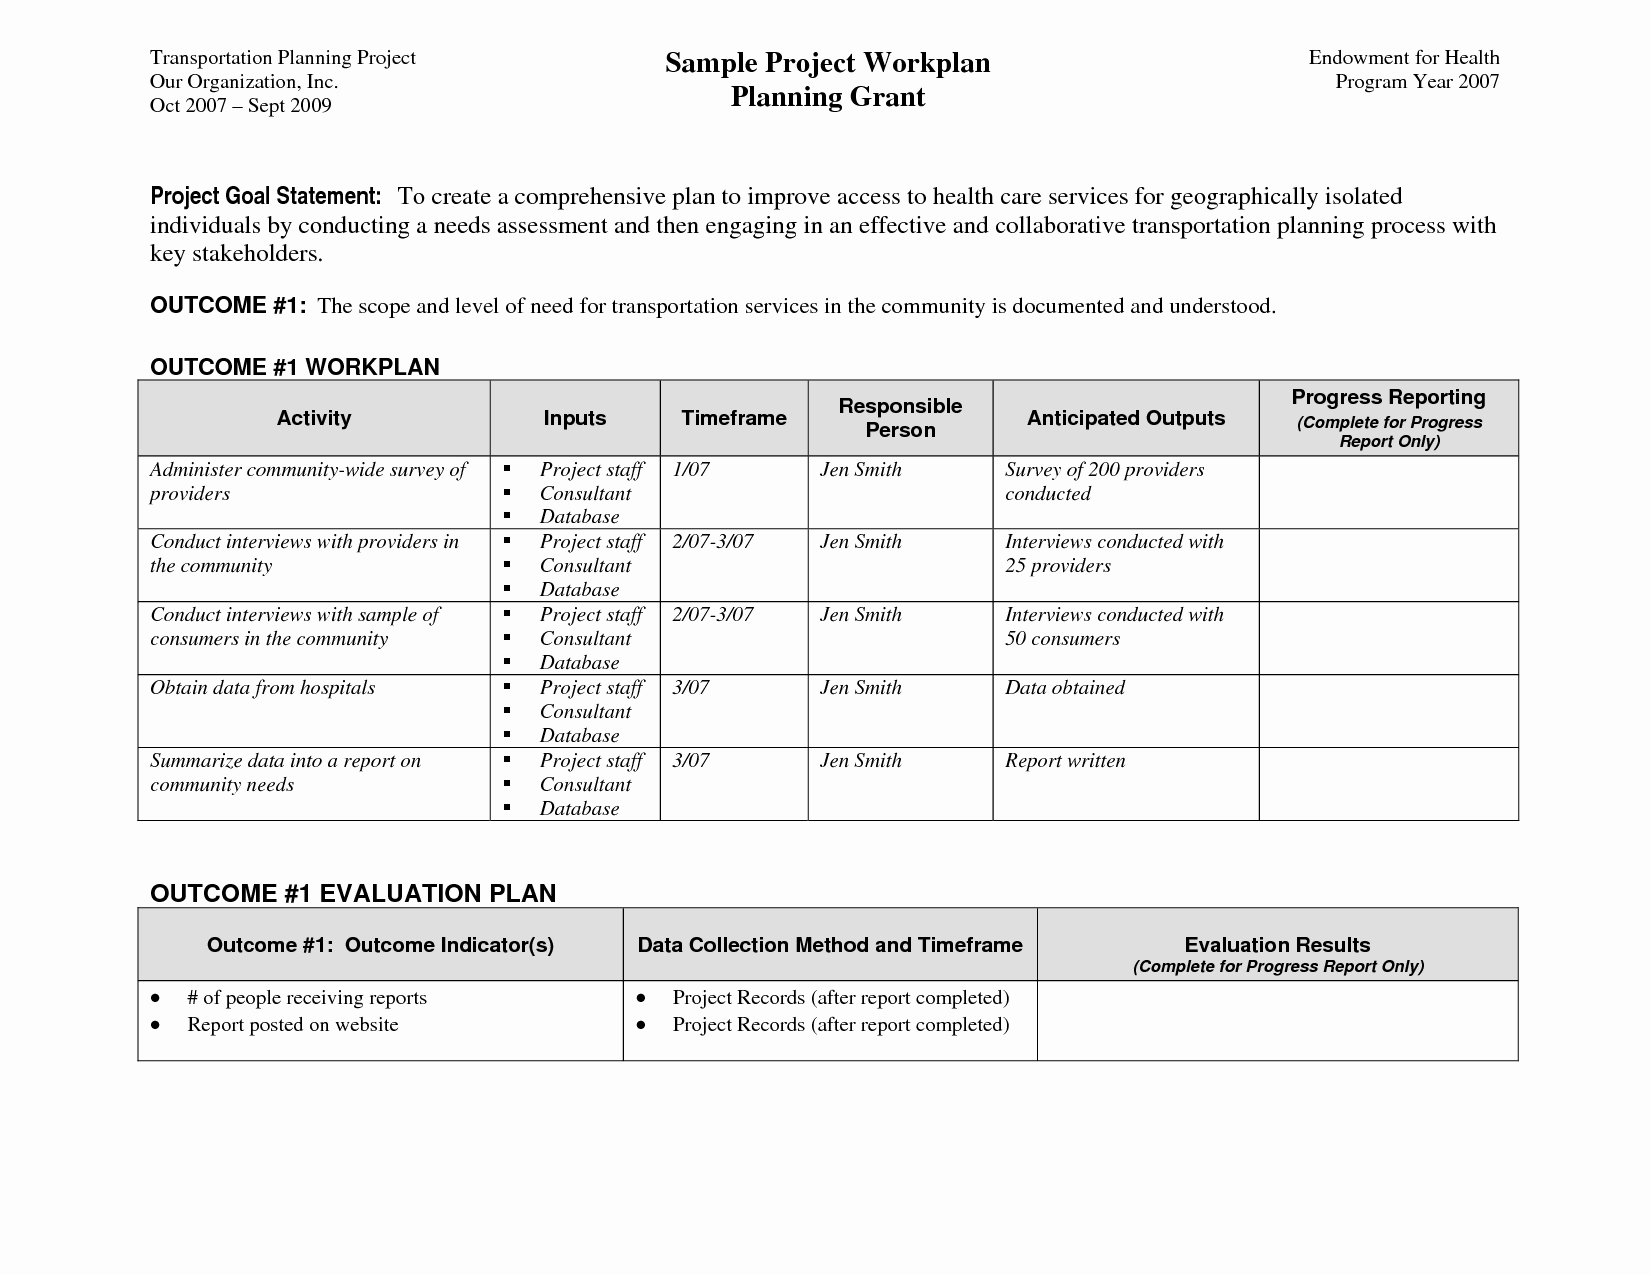 Project Work Plan Template New Best S Of Project Work Plan Examples Project Work